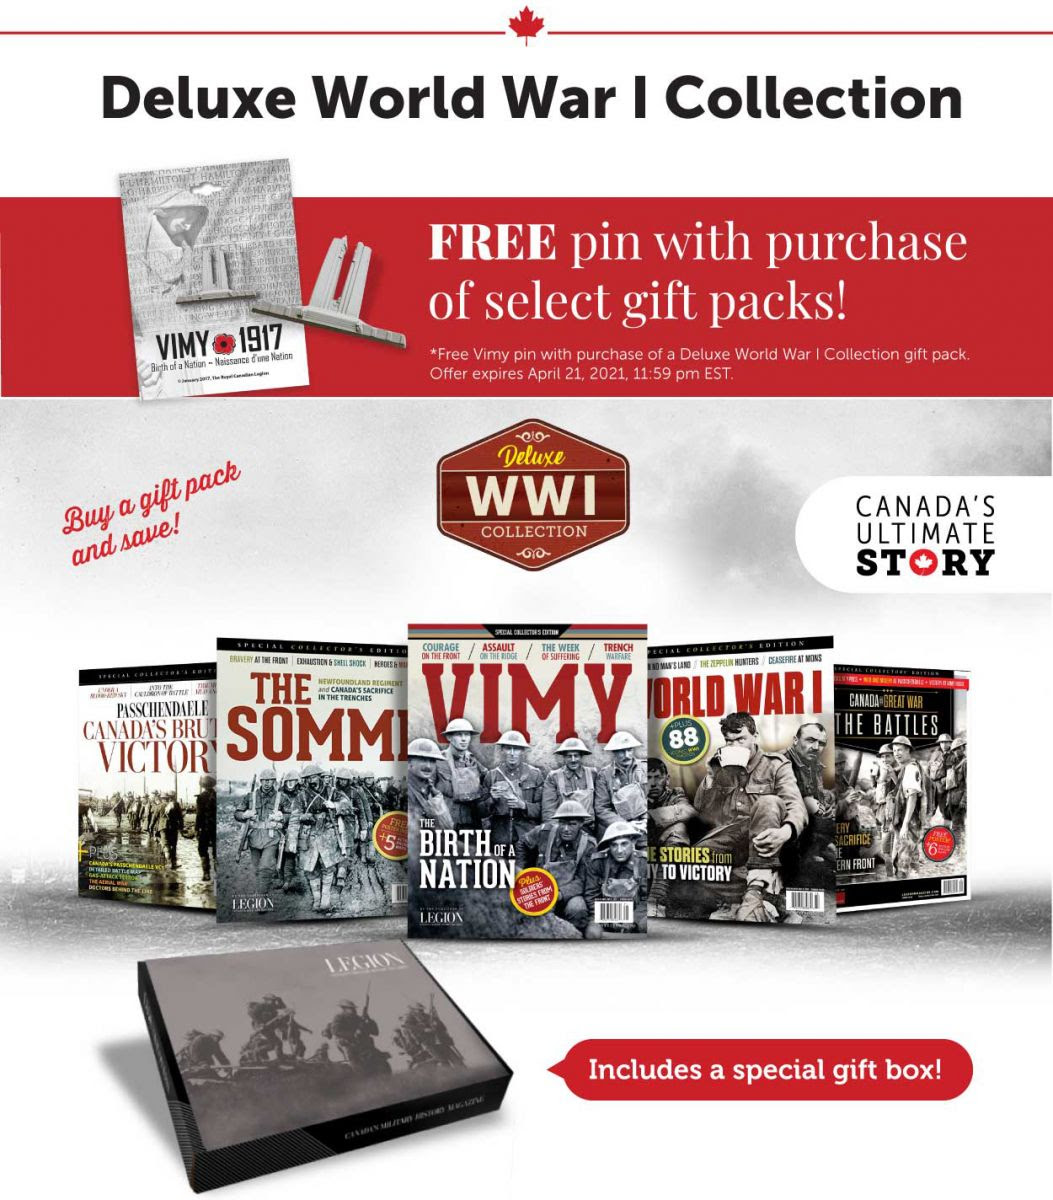 Deluxe World War I Collection